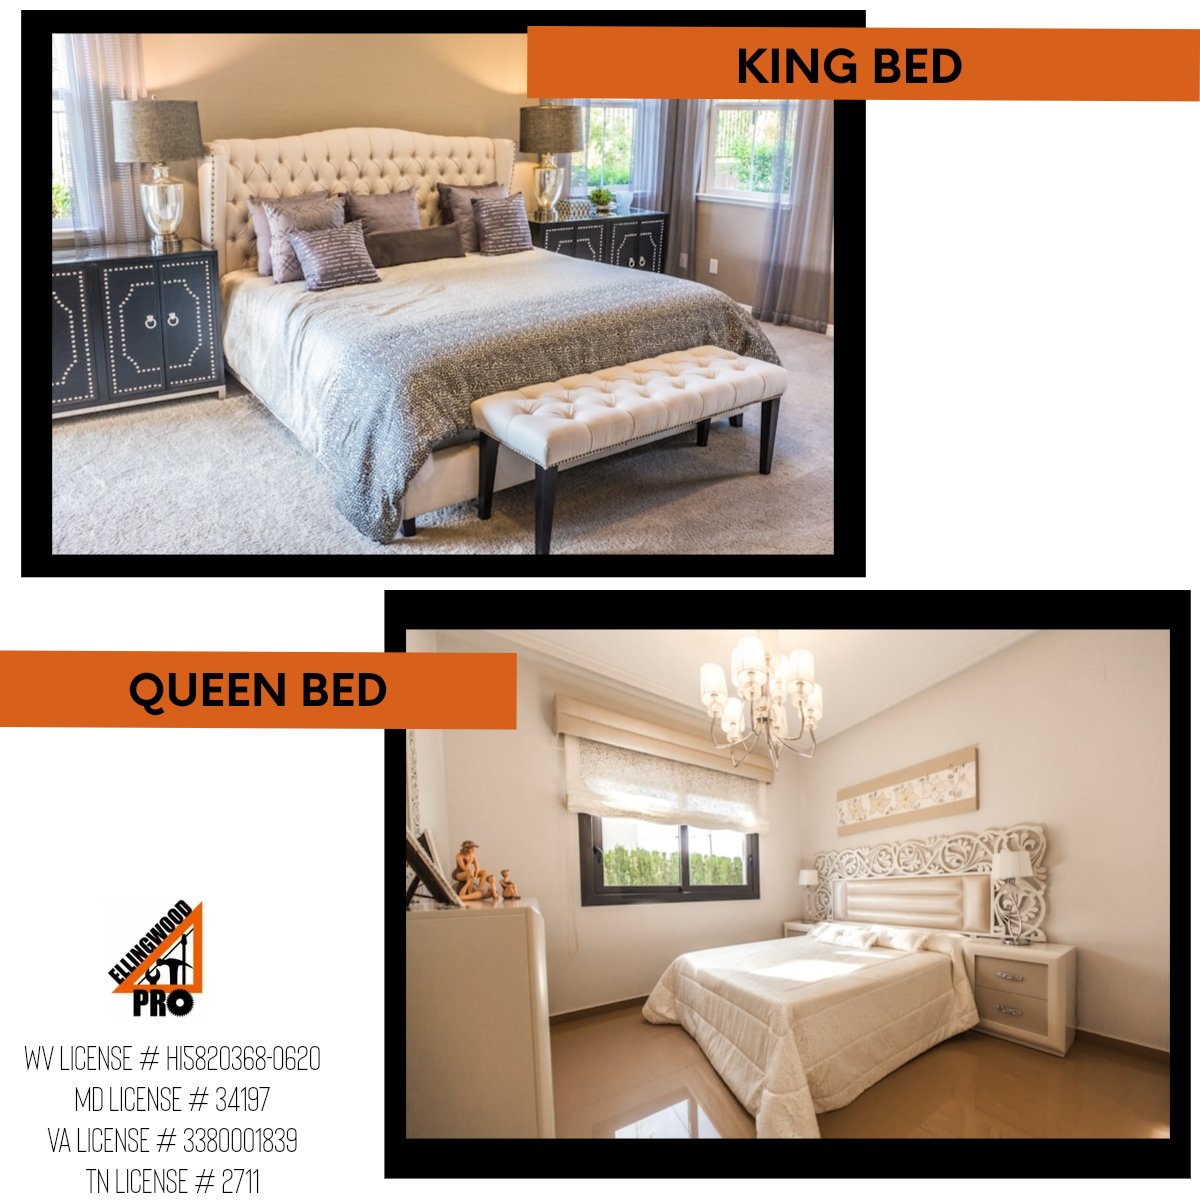 🛏️ #ThisorThatThursday! 👑 As you dream big for your sleep haven, which size bed reigns supreme? 👑 Luxurious king bed for extra space OR 👸 Cozy queen bed for just the right fit? Let us know your royal choice in the comments! 👑🌙 

#inspectb4ubuy #ellingwoodpro #homeinspections